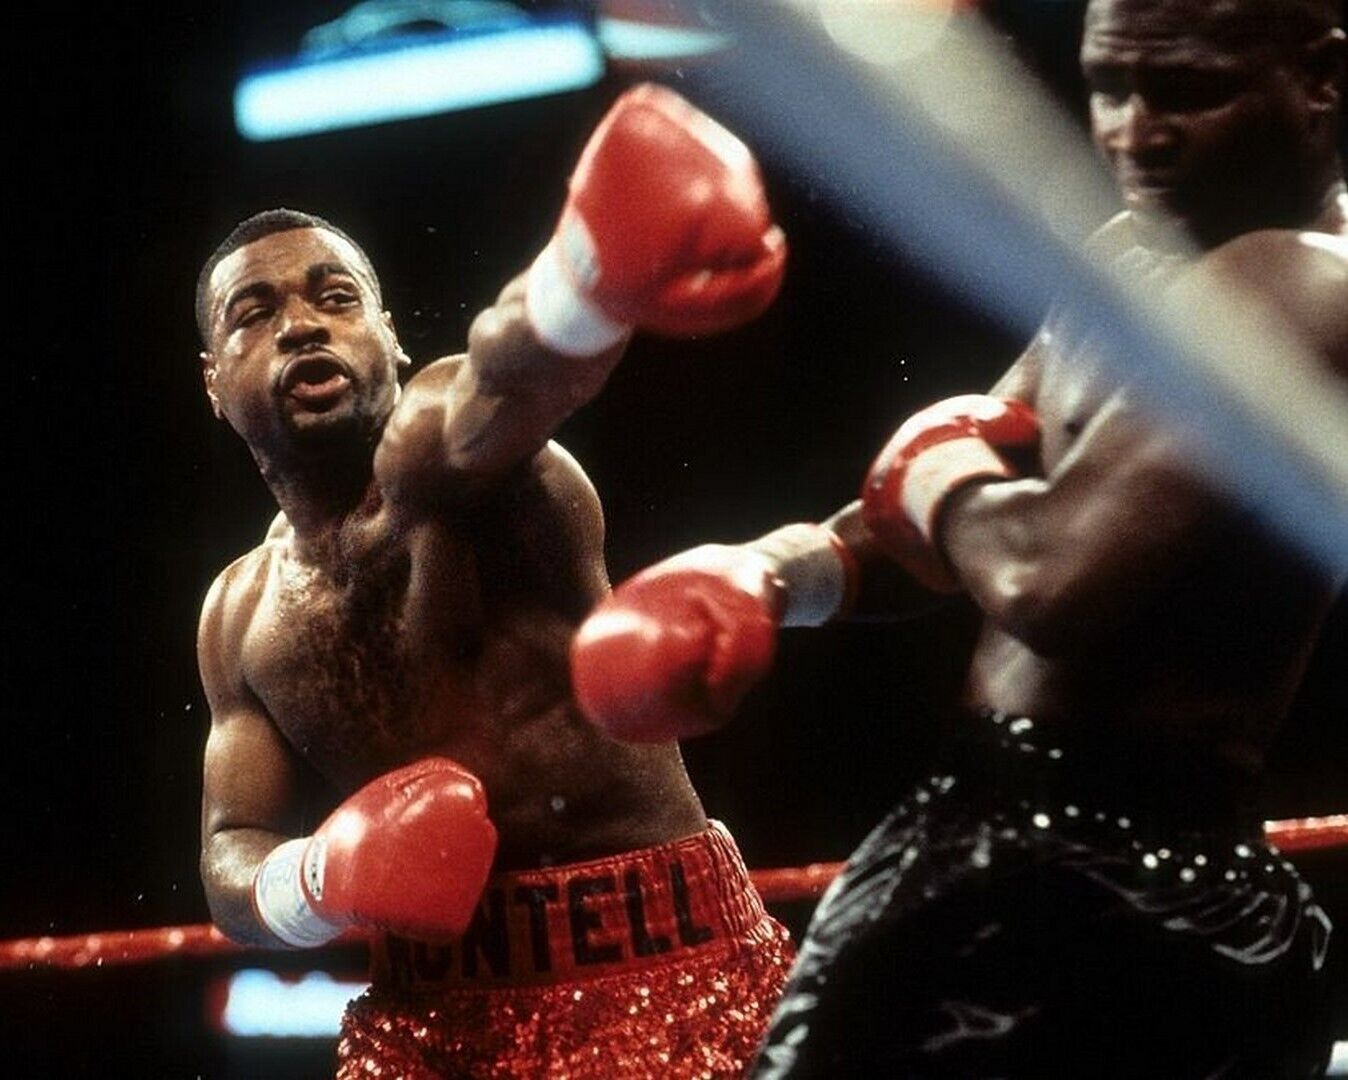 Primary image for MONTELL GRIFFIN 8X10 PHOTO BOXING PICTURE ATTACKING